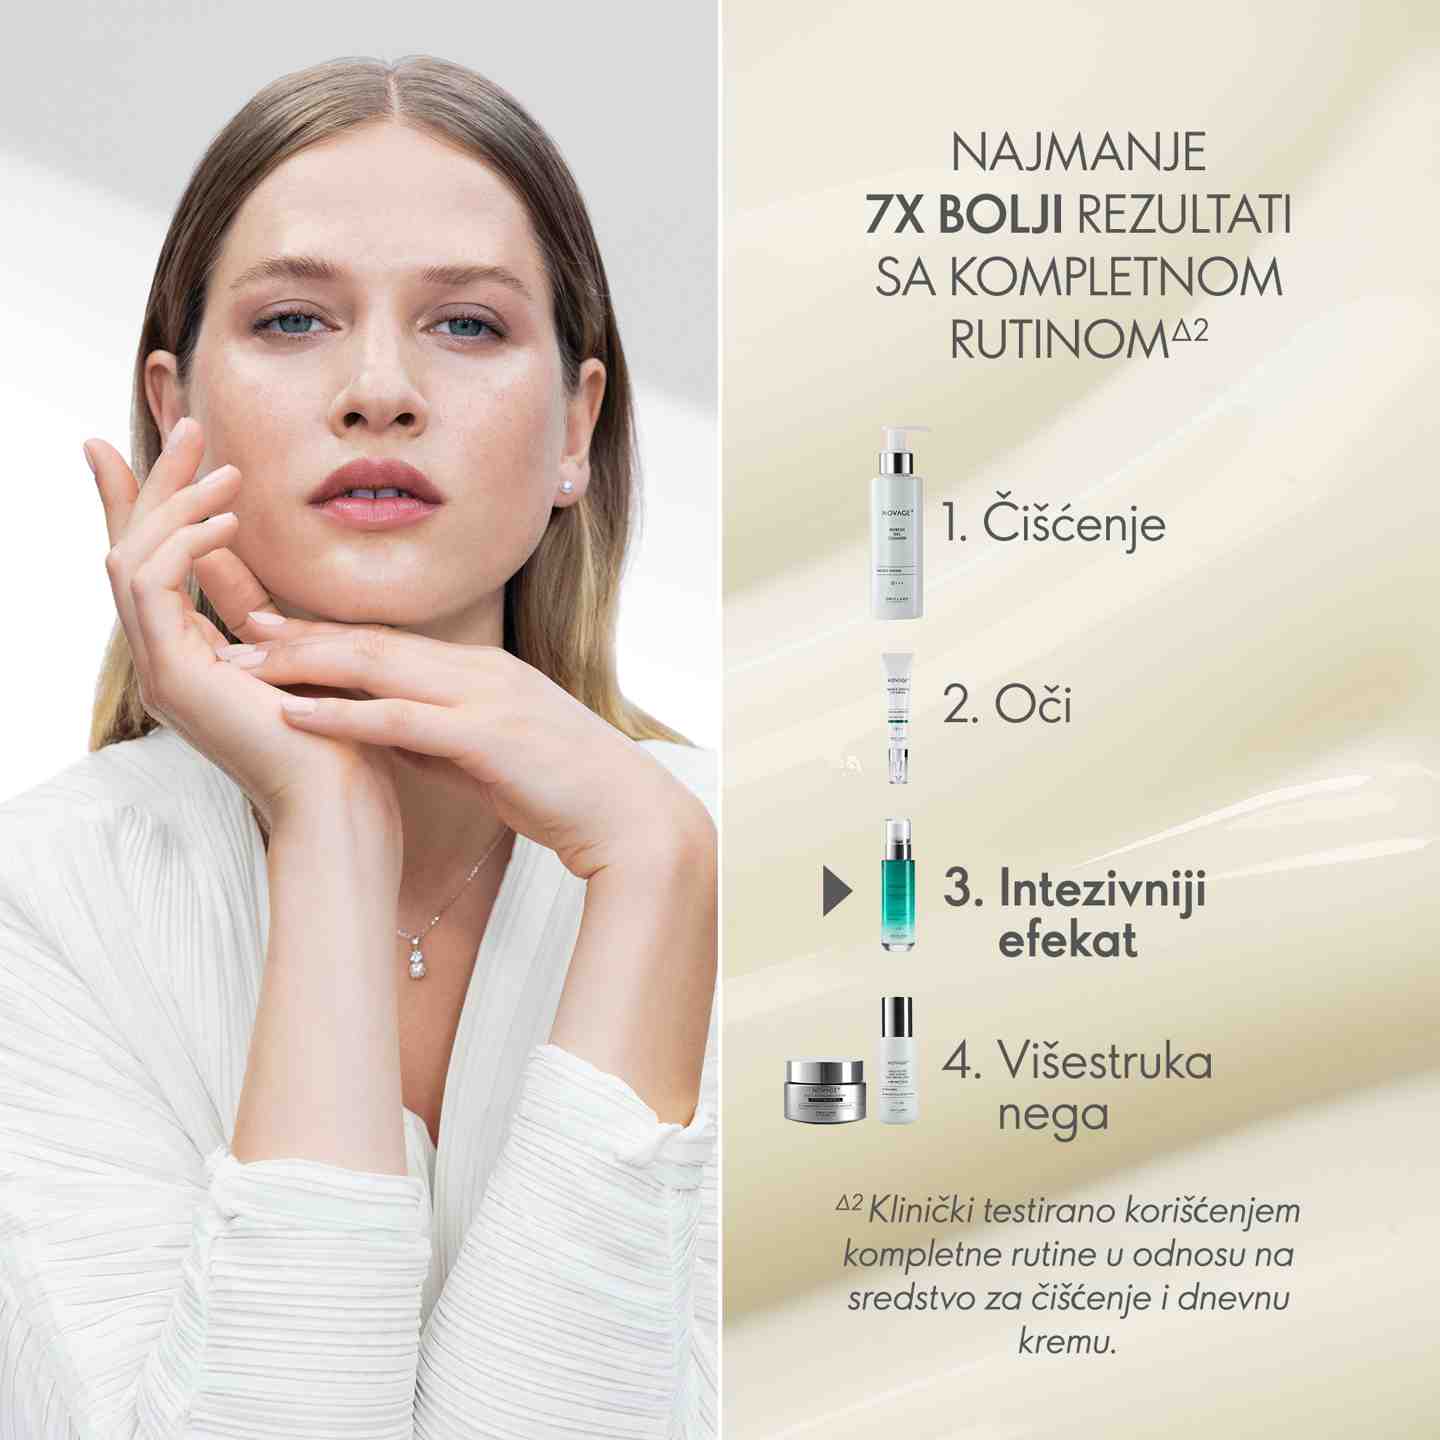 https://media-cdn.oriflame.com/productImage?externalMediaId=product-management-media%2fProducts%2f41035%2fME%2f41035_5.png&id=17551253&version=2